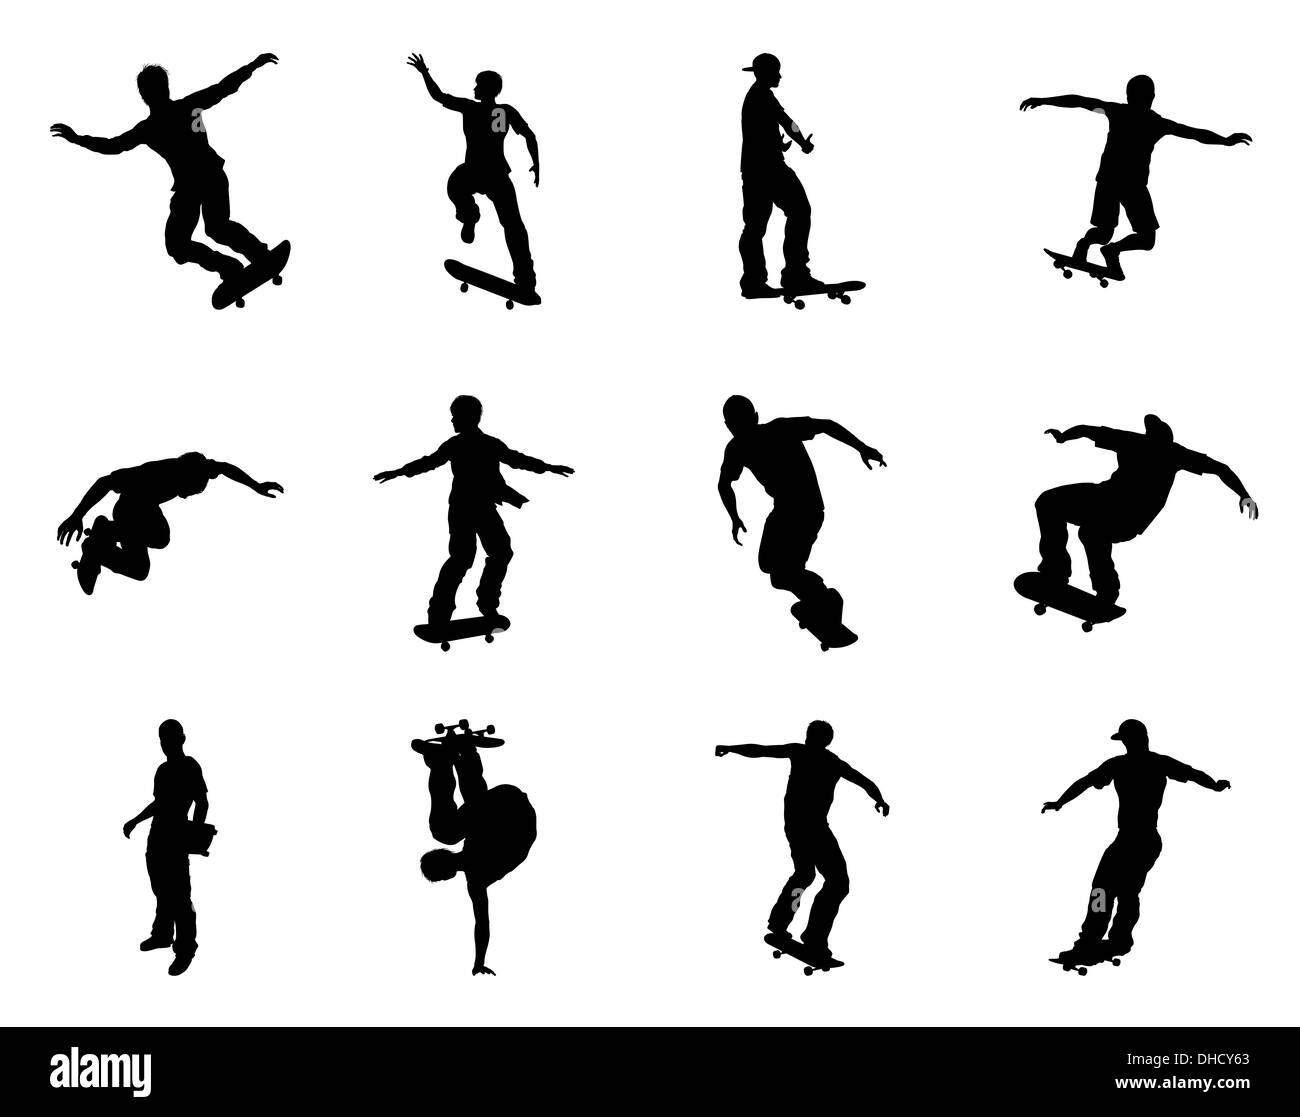 Highly detailed skating skateboarder silhouette outlines. Skateboarders performing lots of tricks on their boards. Stock Photo